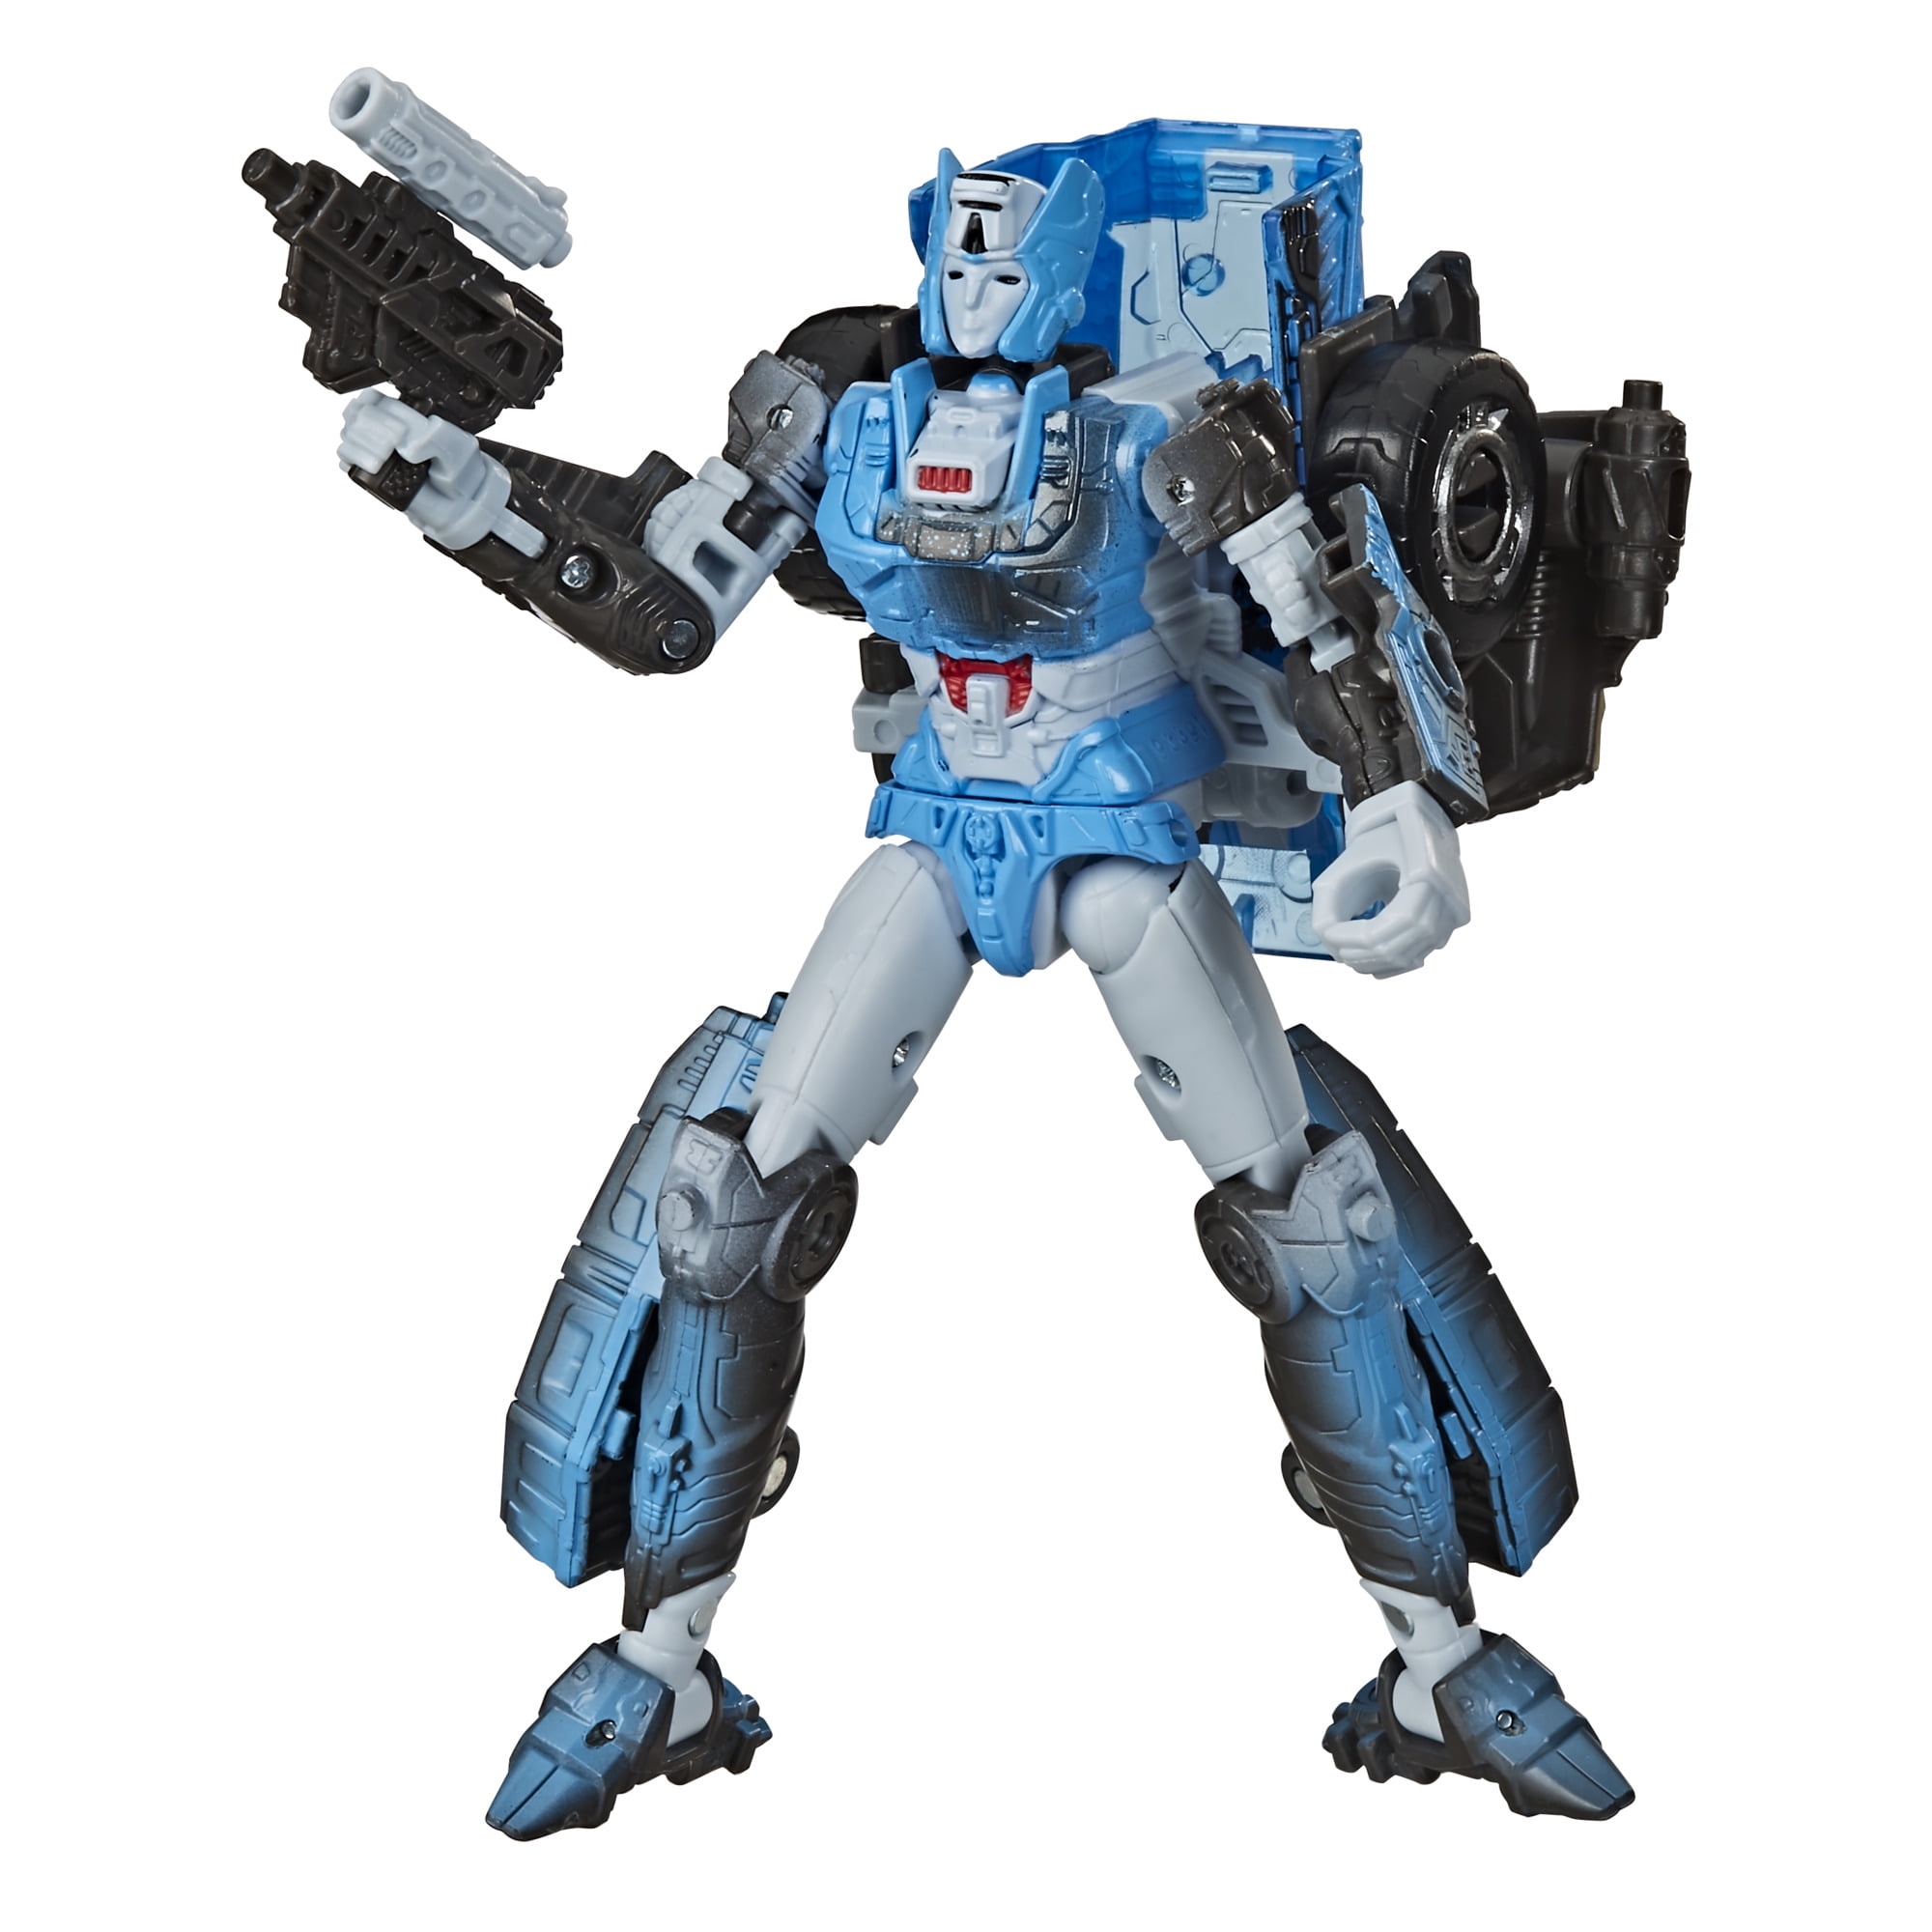 Transformers Siege War for Cybertron Deluxe Chromia Figure 